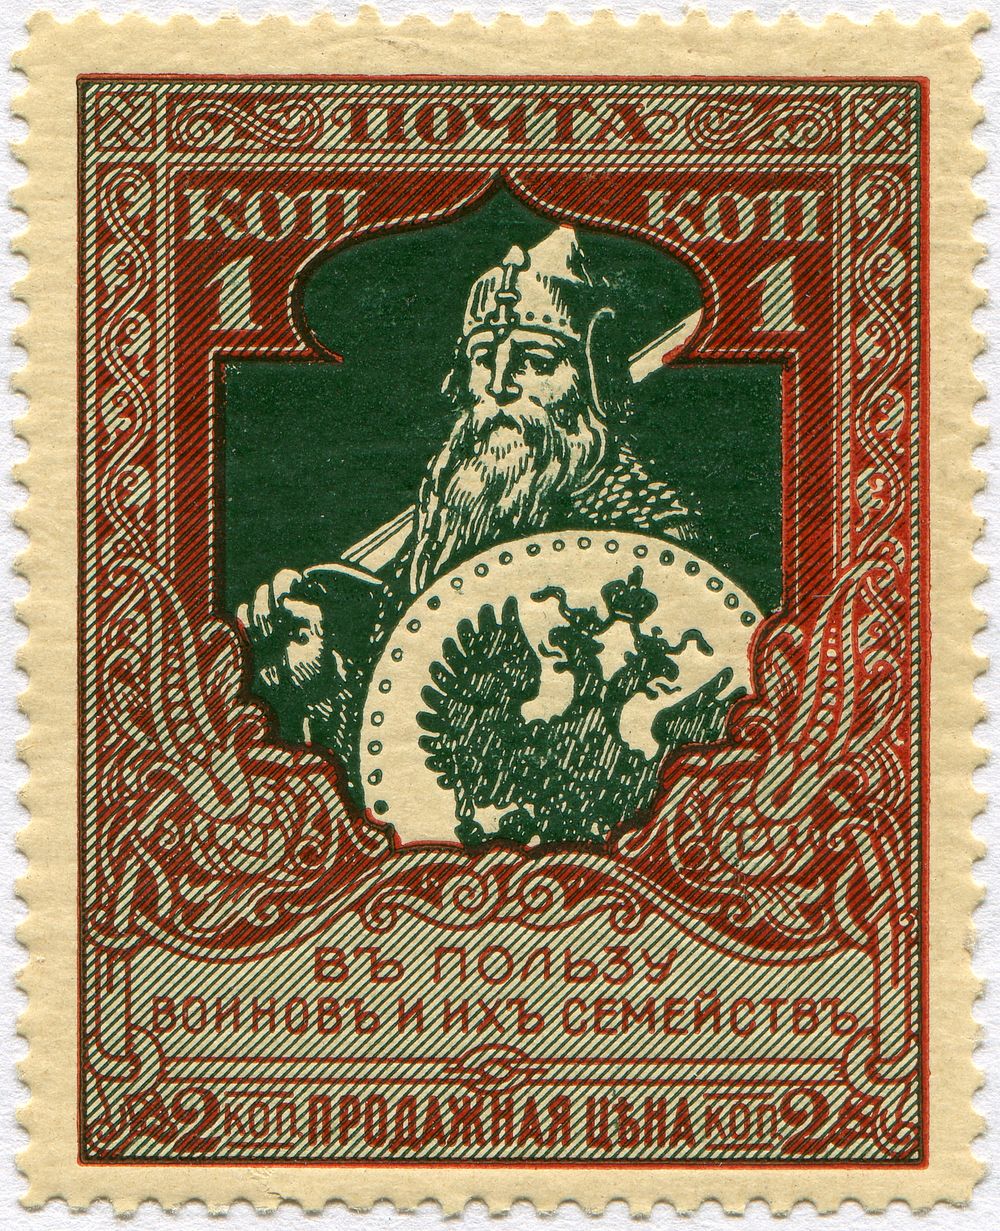 Stamps of the Russian Empire.